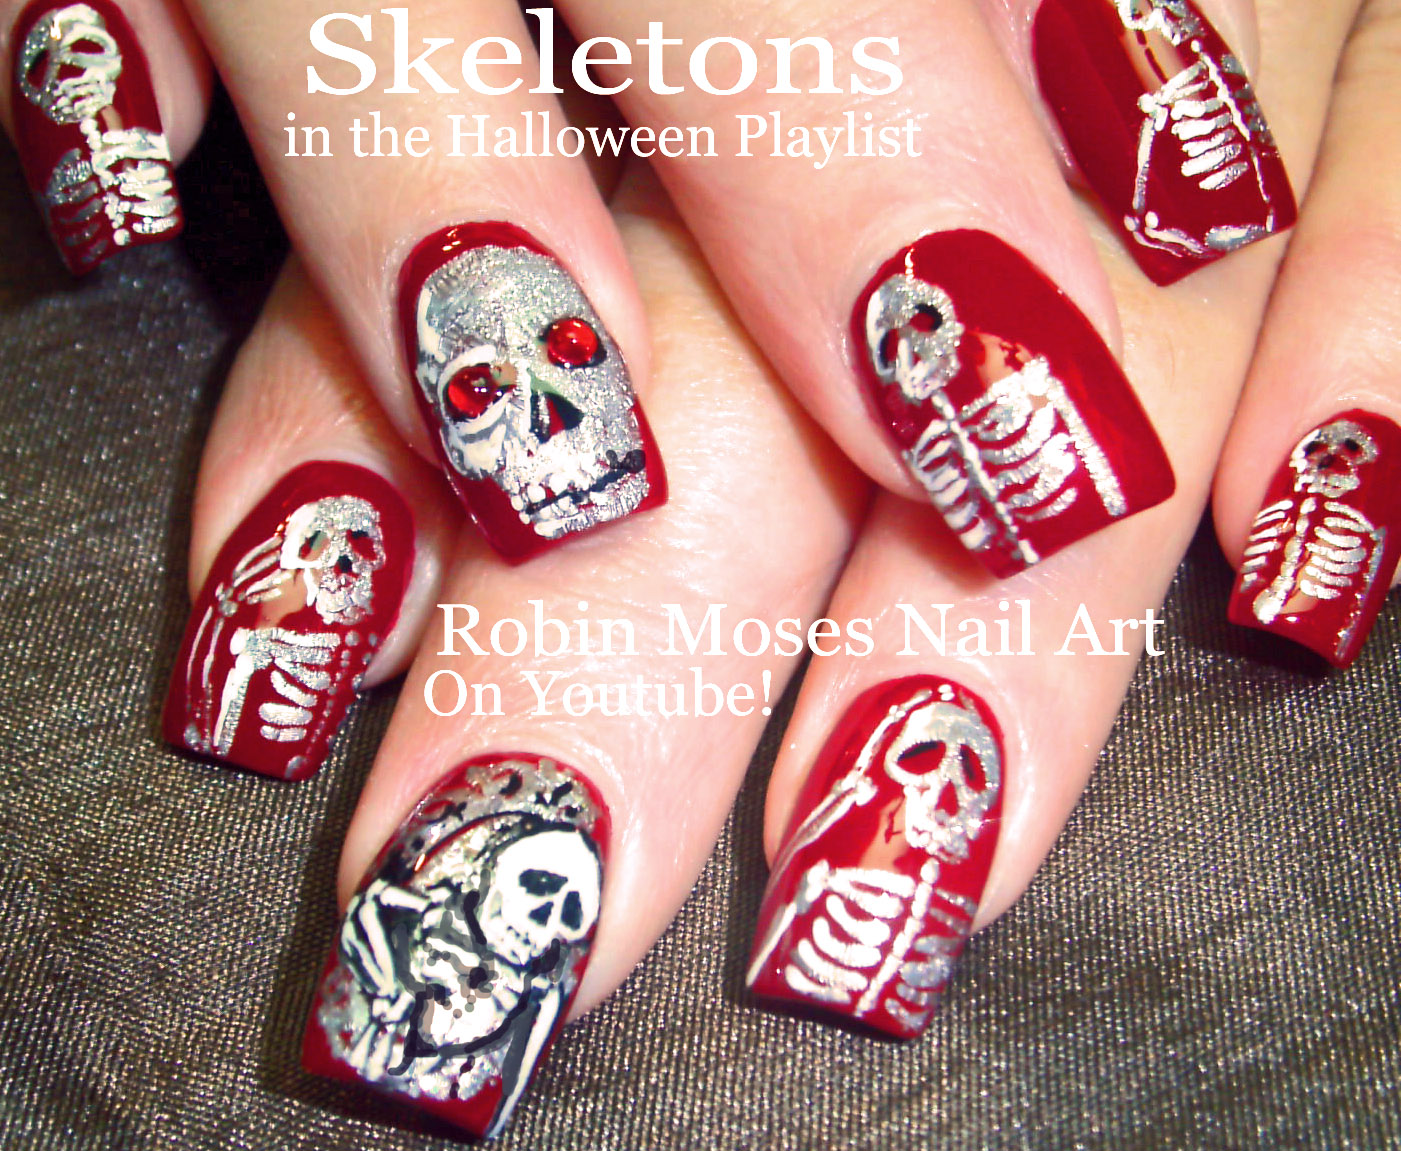 9. Festive Halloween Nail Art for Any Occasion - wide 7